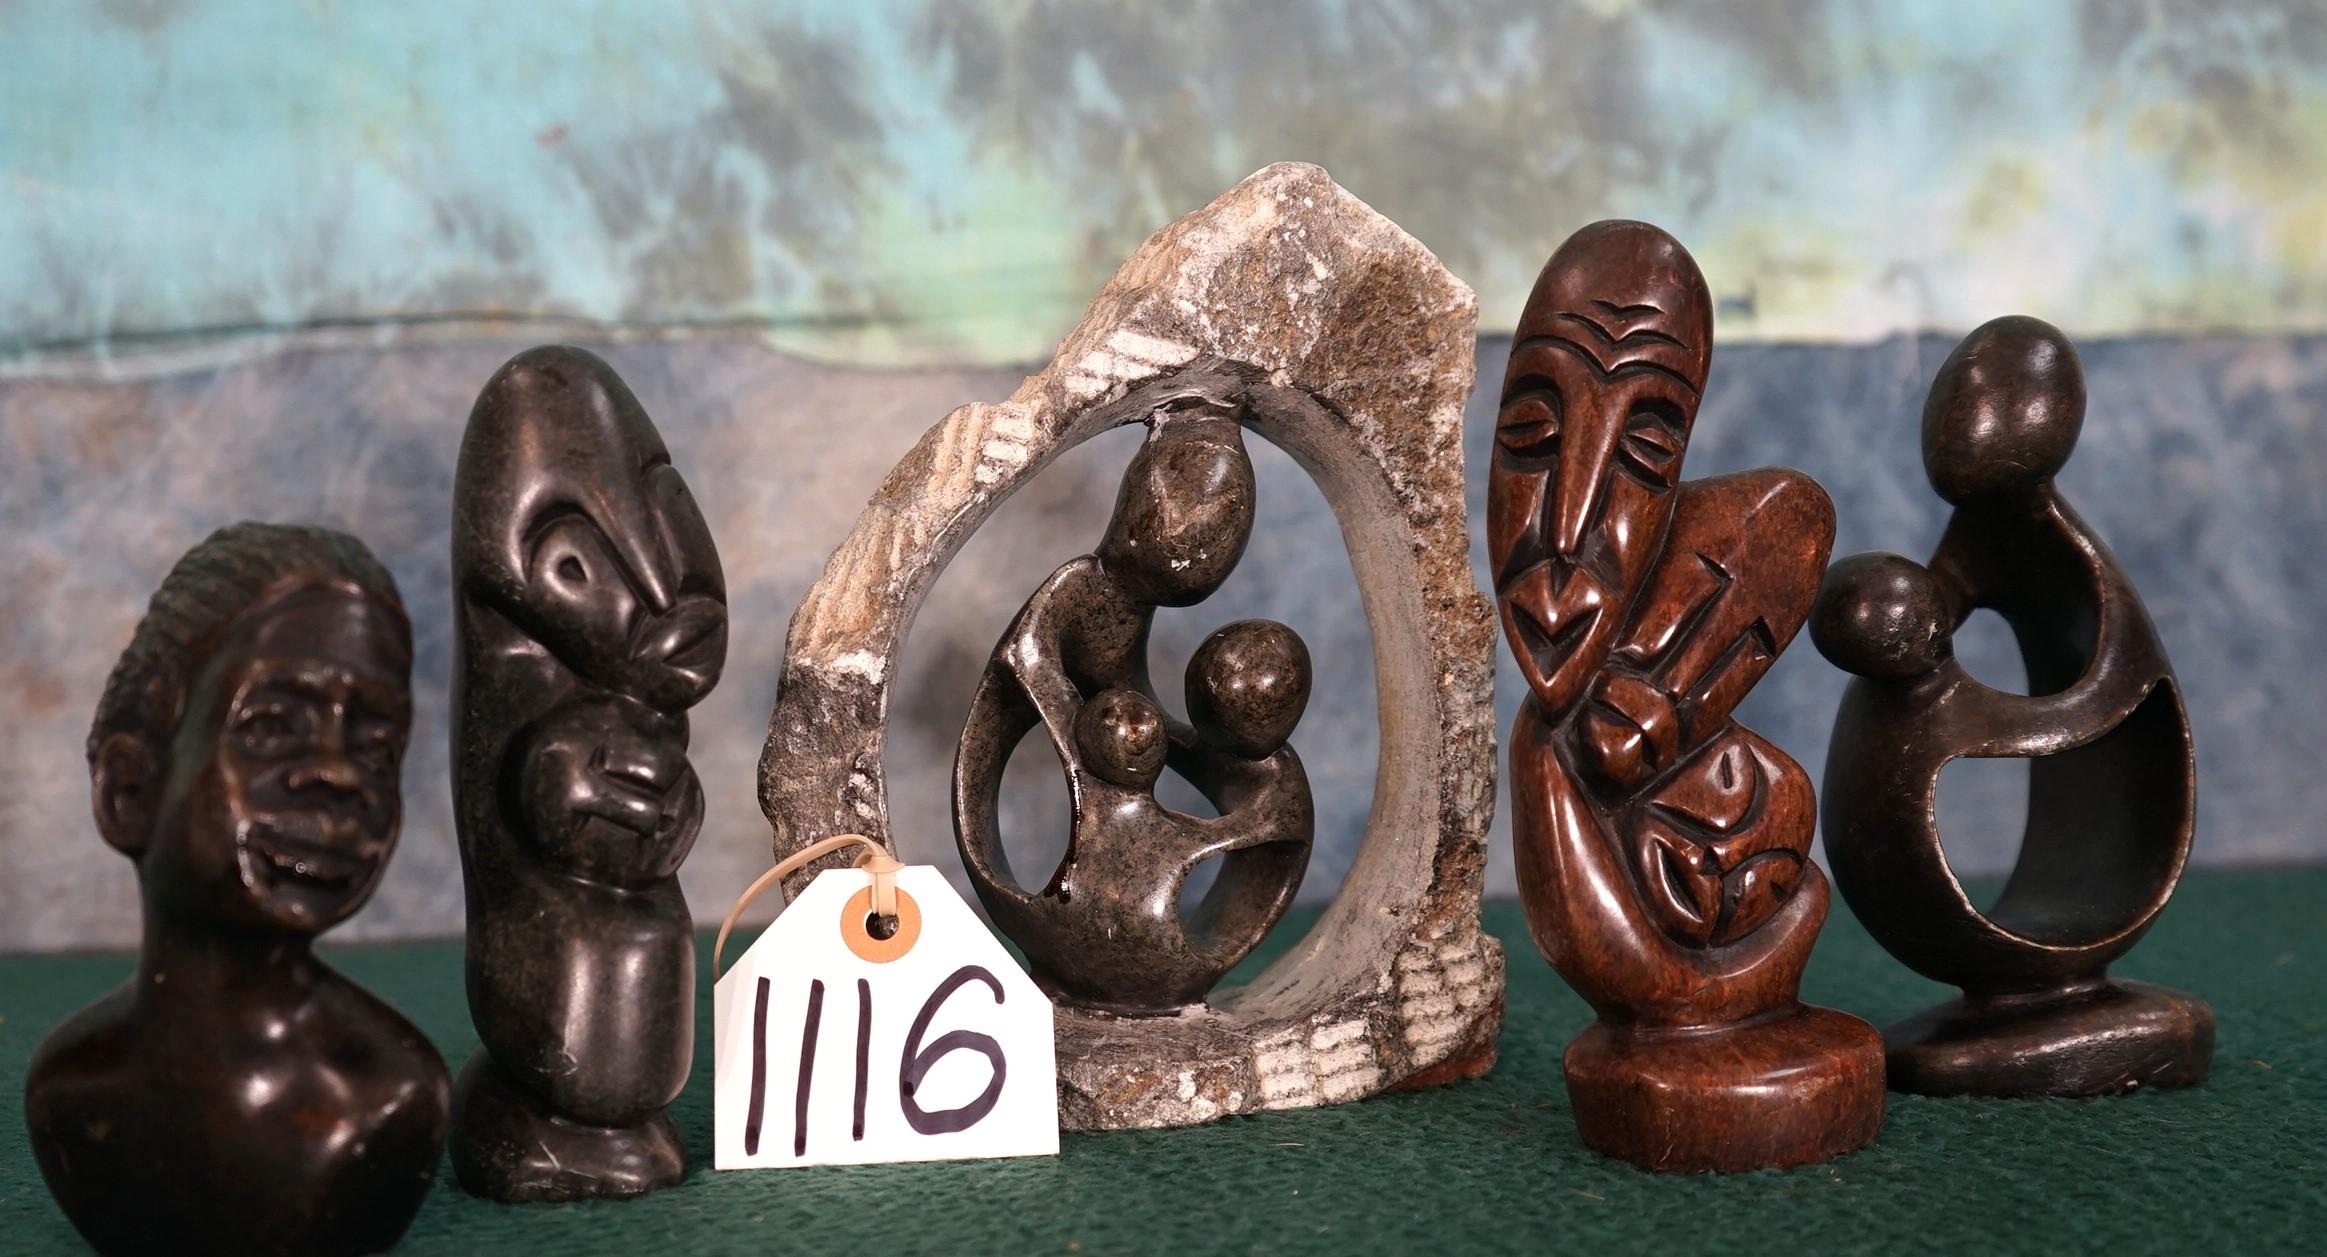 Five African People Statues made from Soapstone